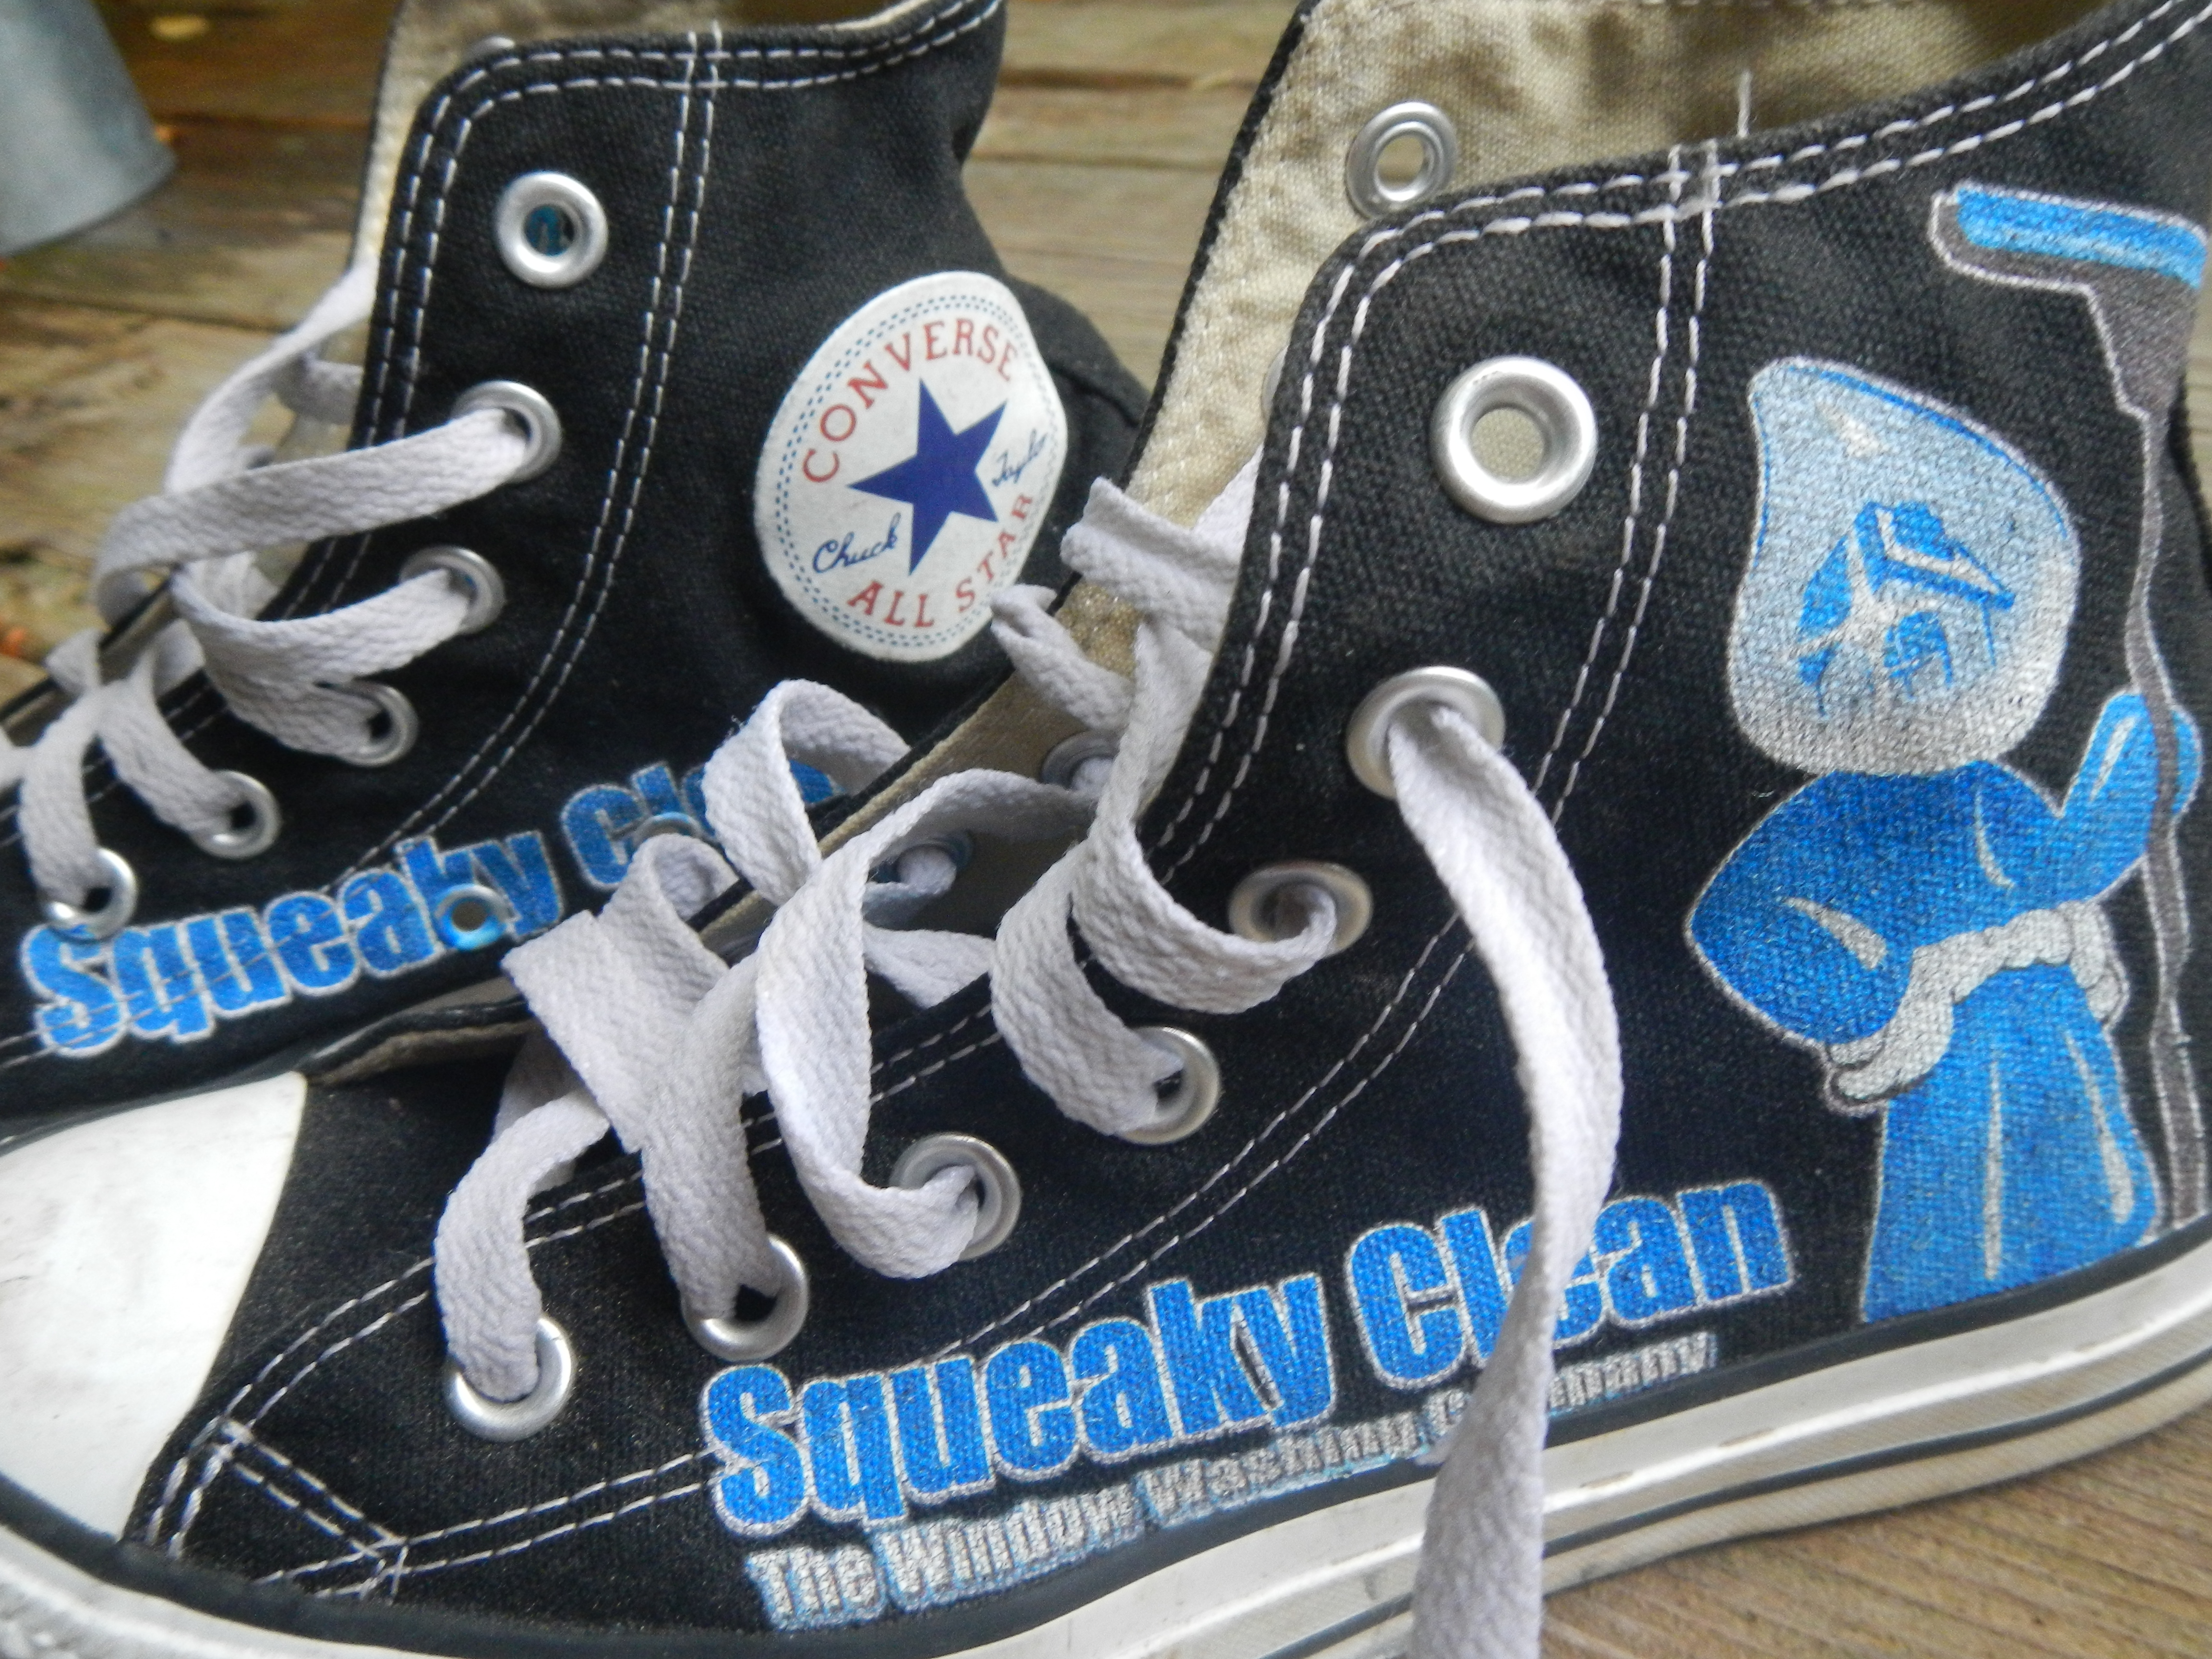  Squeaky Clean The Window Washing Company branded Converse Shoes